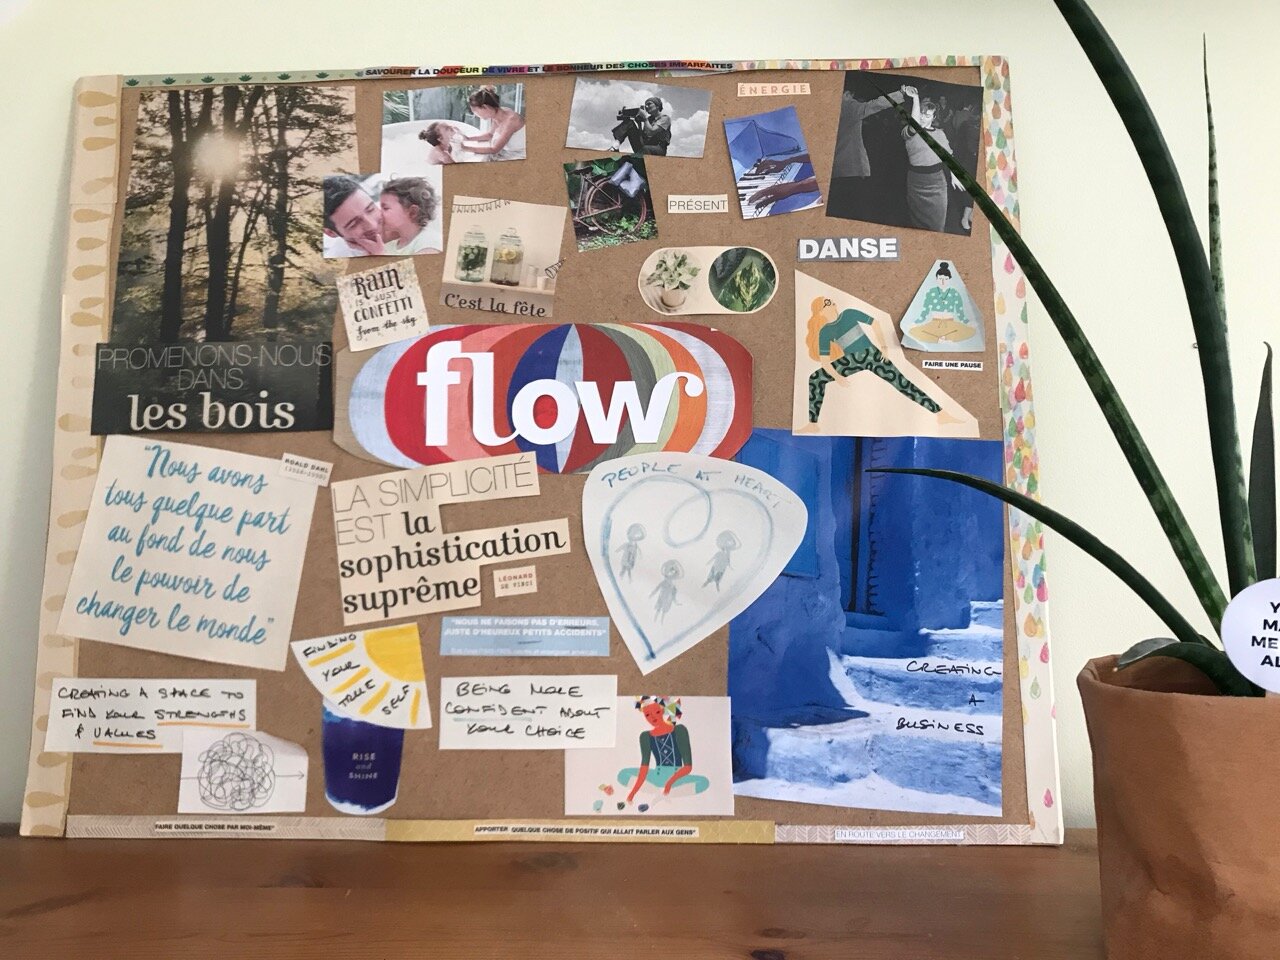 Could a vision board workshop change your life?